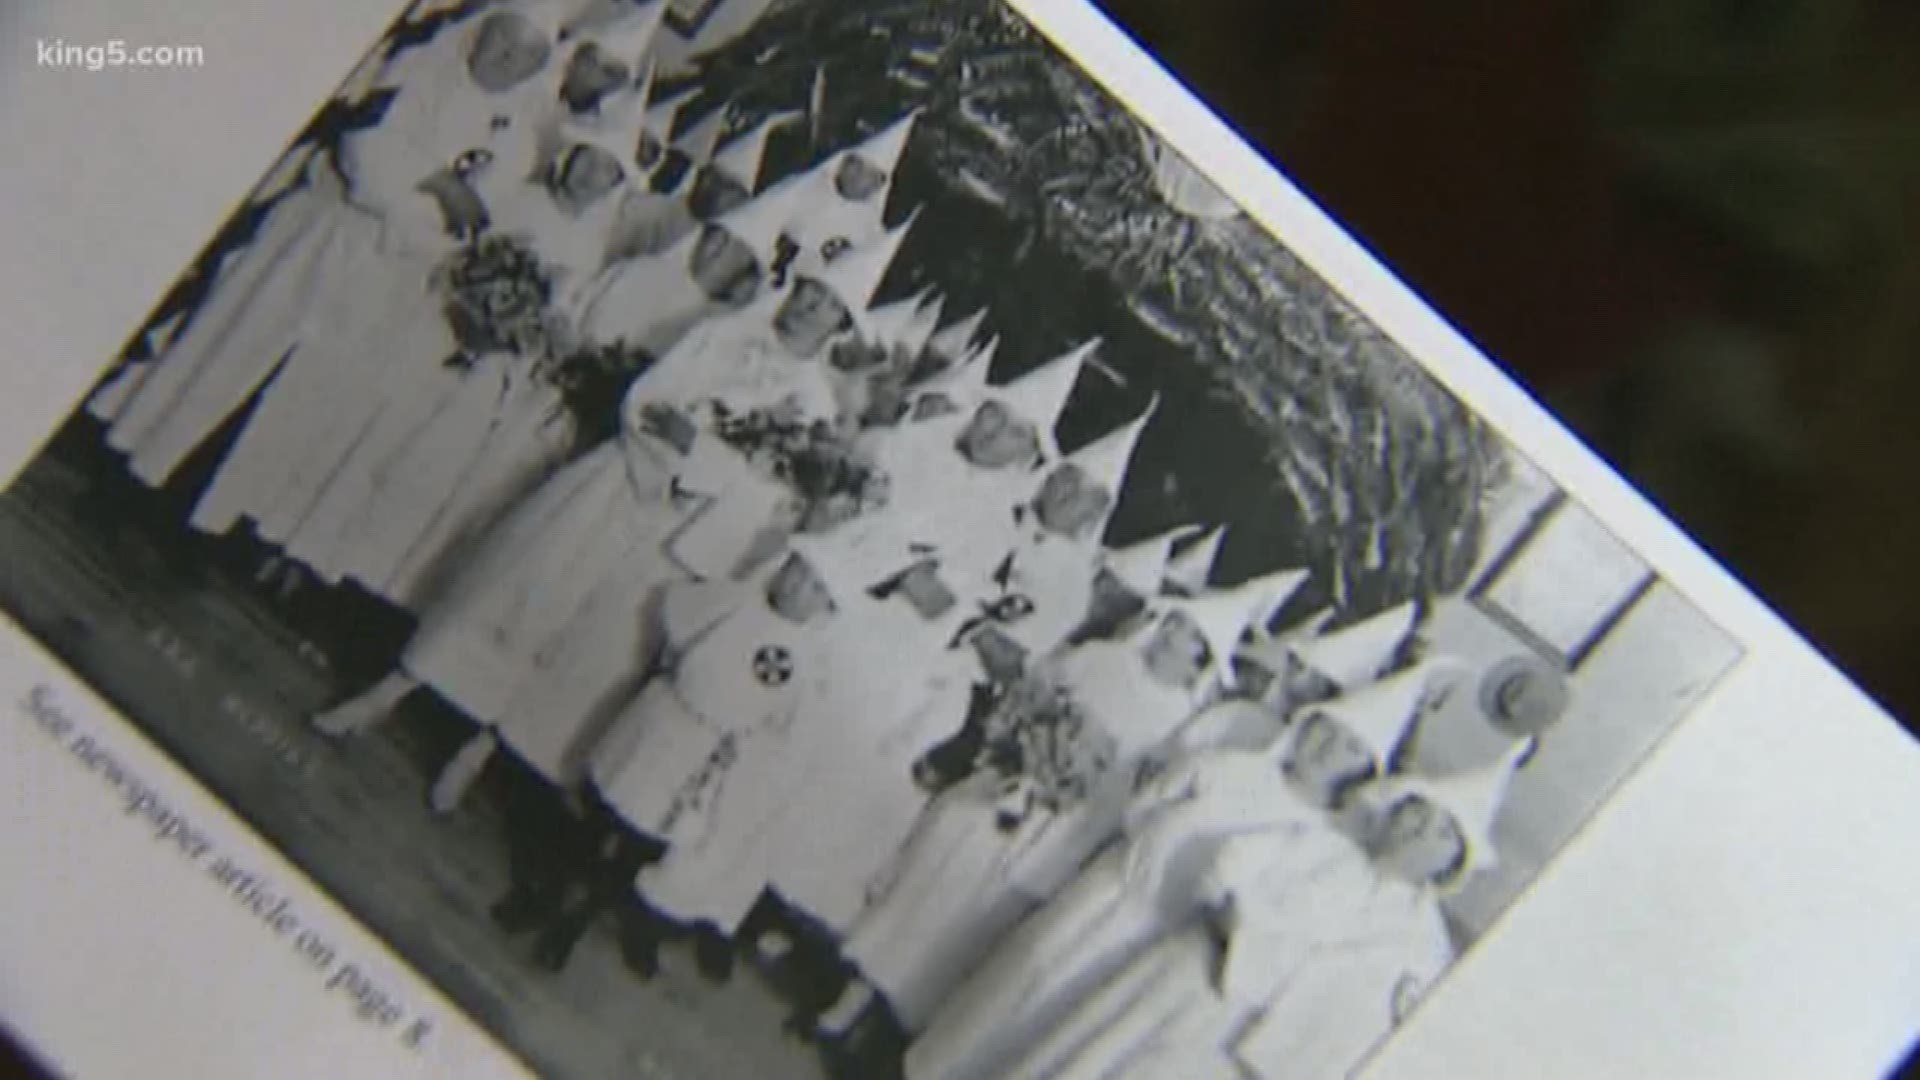 Painful memories are being dredged up after a museum in Sedro-Woolley published photos of the KKK and then mailed them to city residents. KING 5's Eric Wilkinson reports.